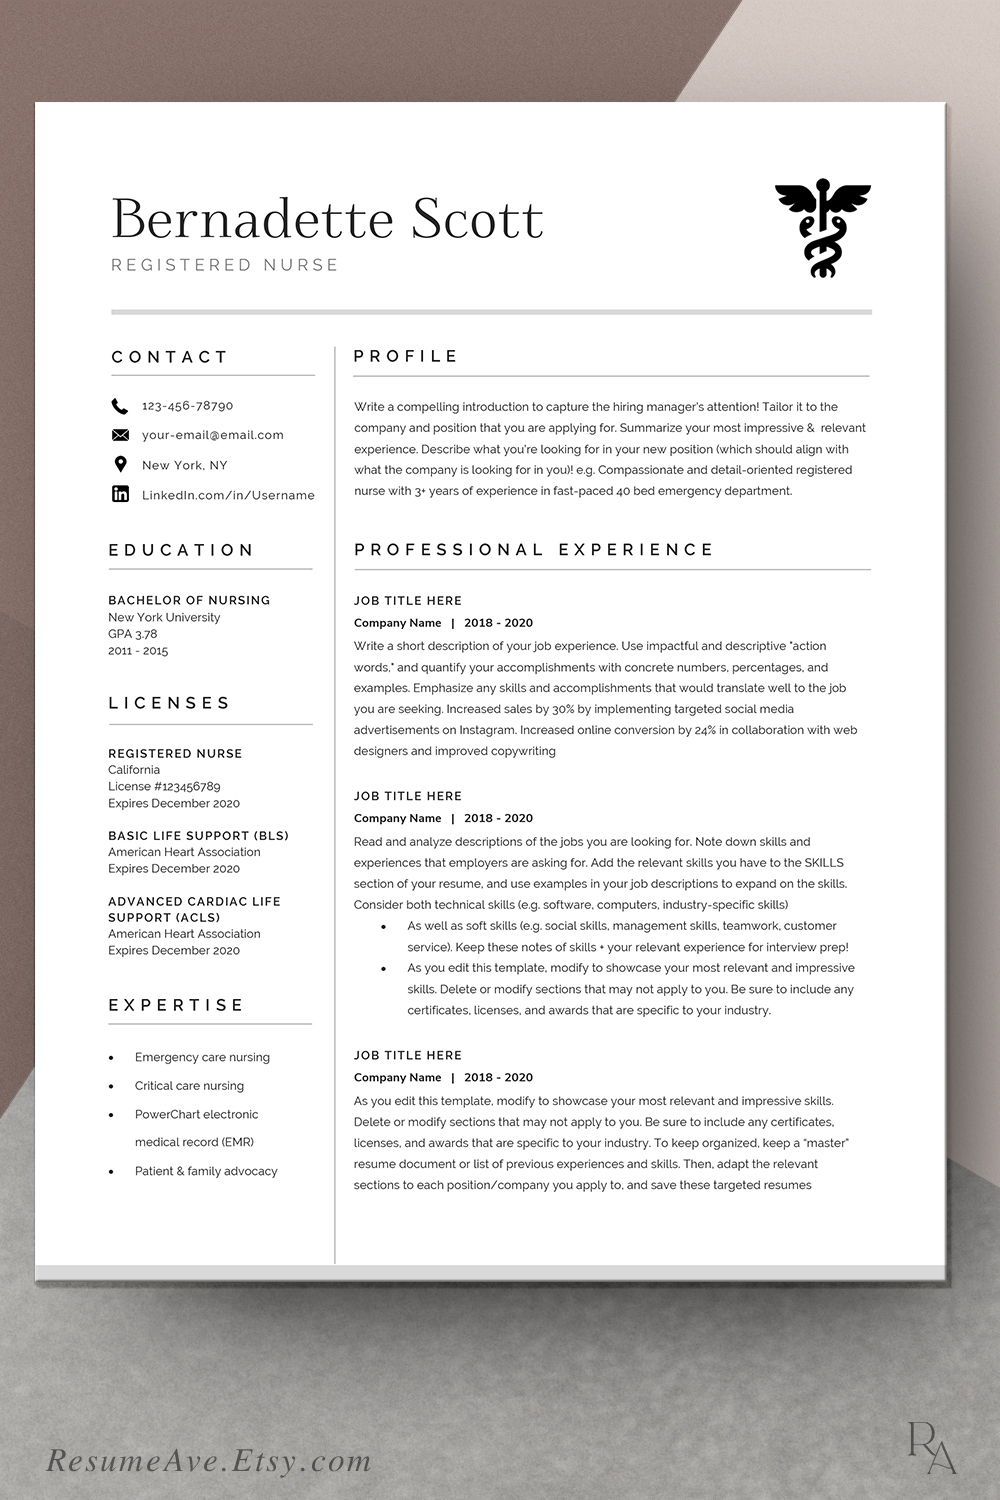 Should A Resume Only Be One Page